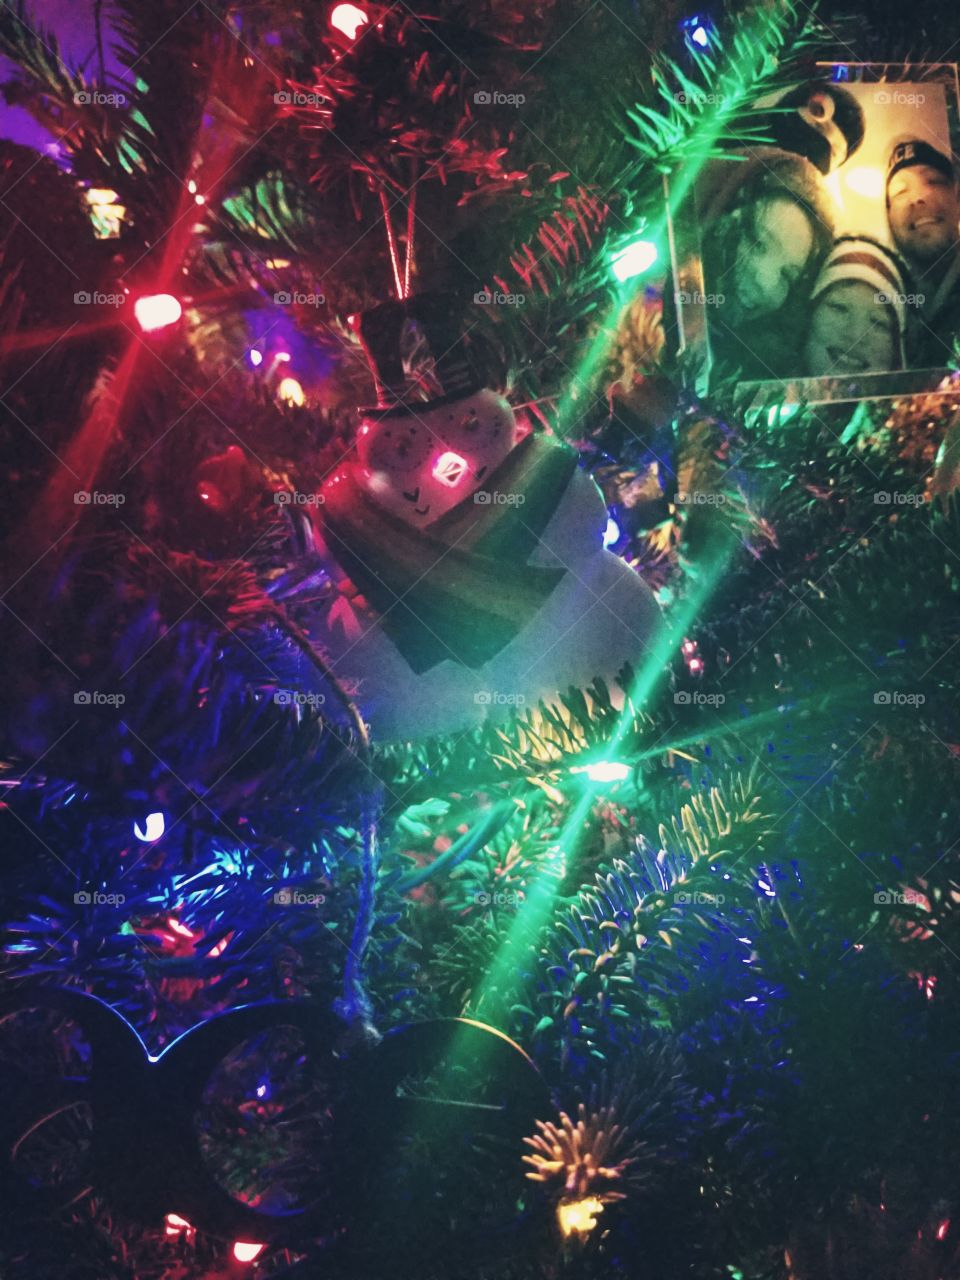 A close up view of our Christmas tree - sporting a unique ornament of two male snowmen embracing one another.